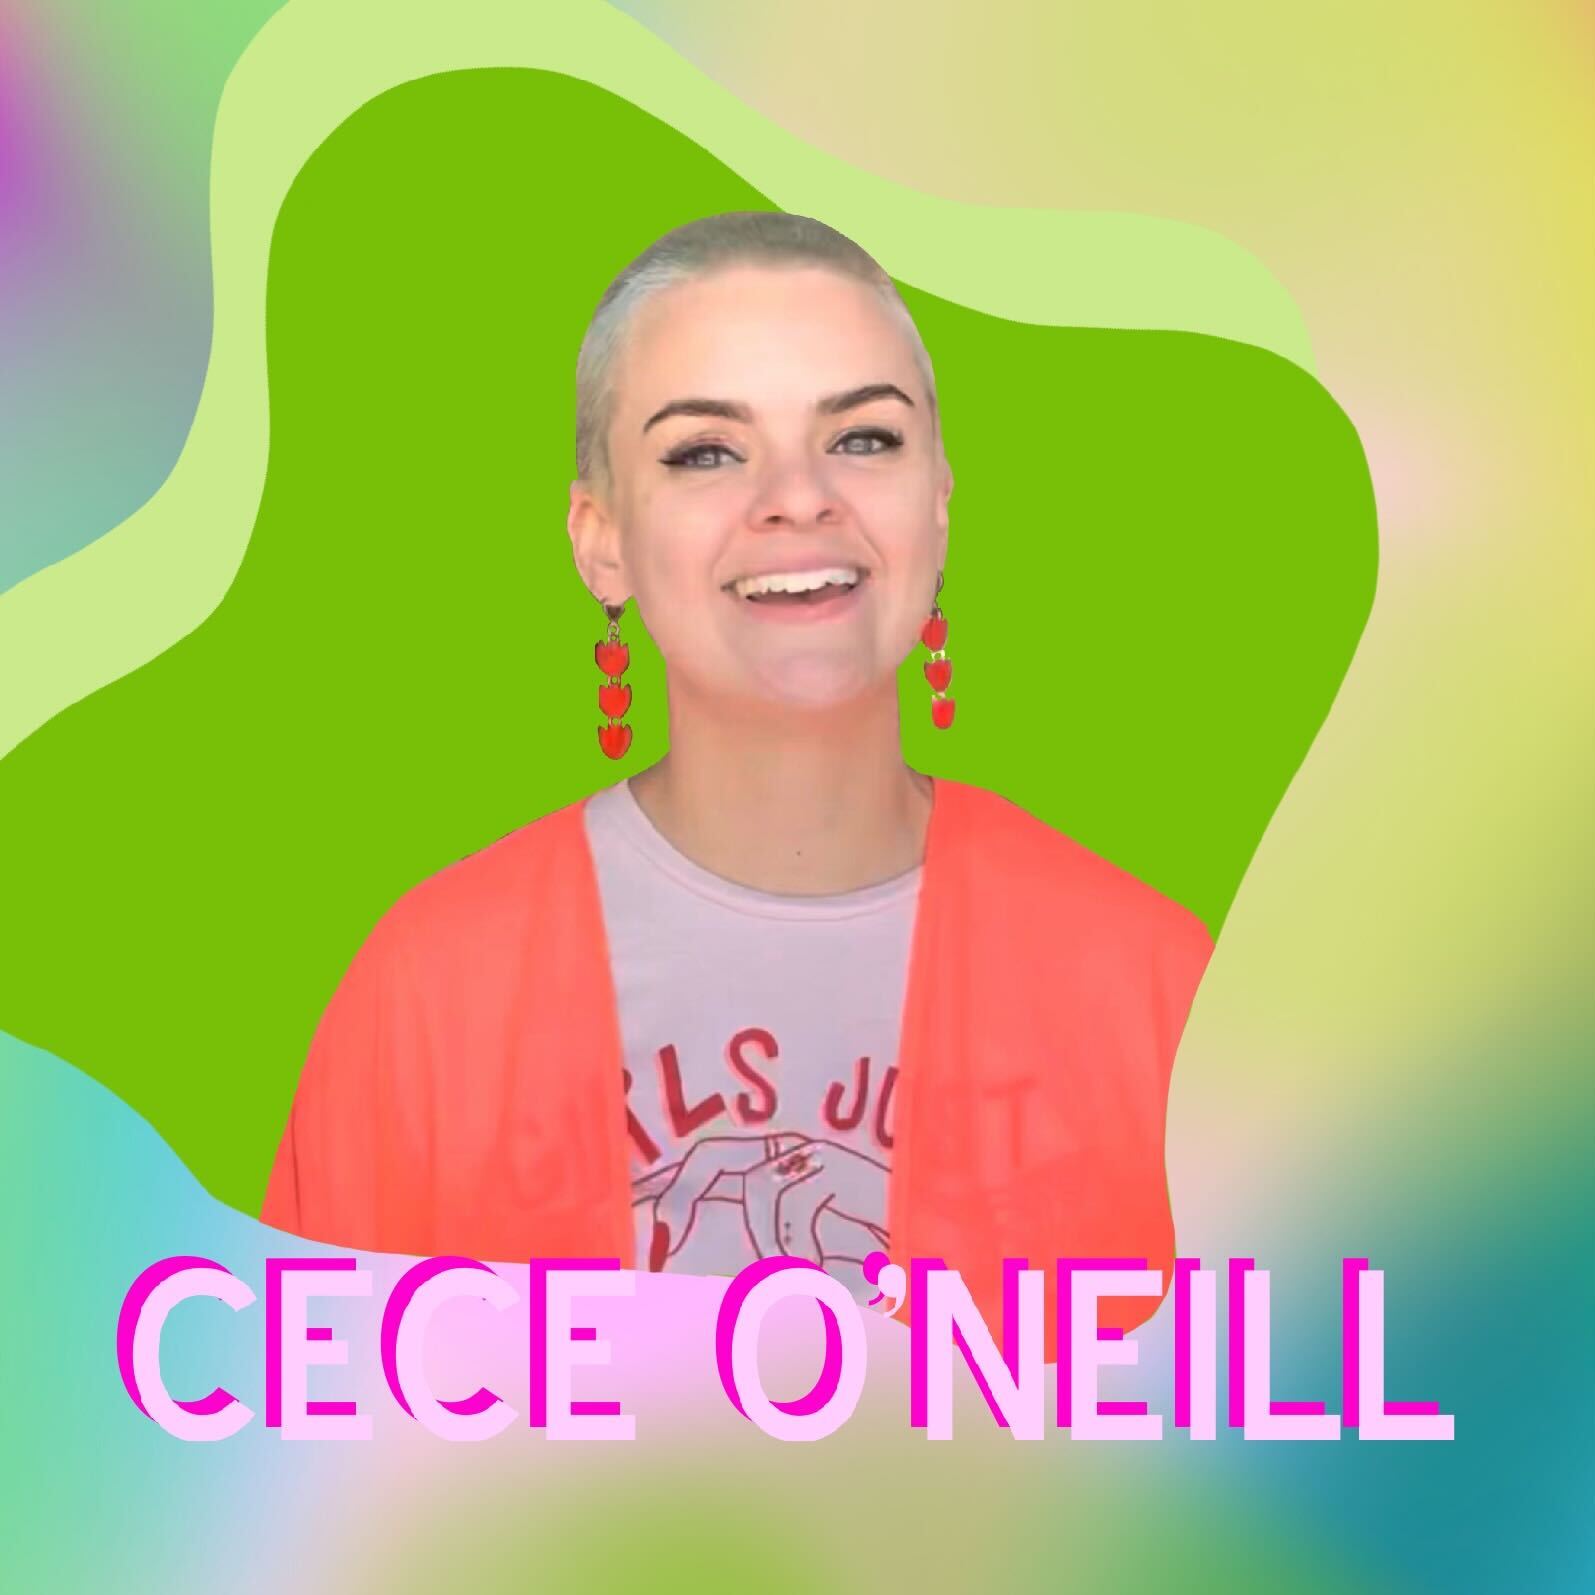 Woman with shaved head, in bright clothing, with "CECE O'NEILL" overlaid text.